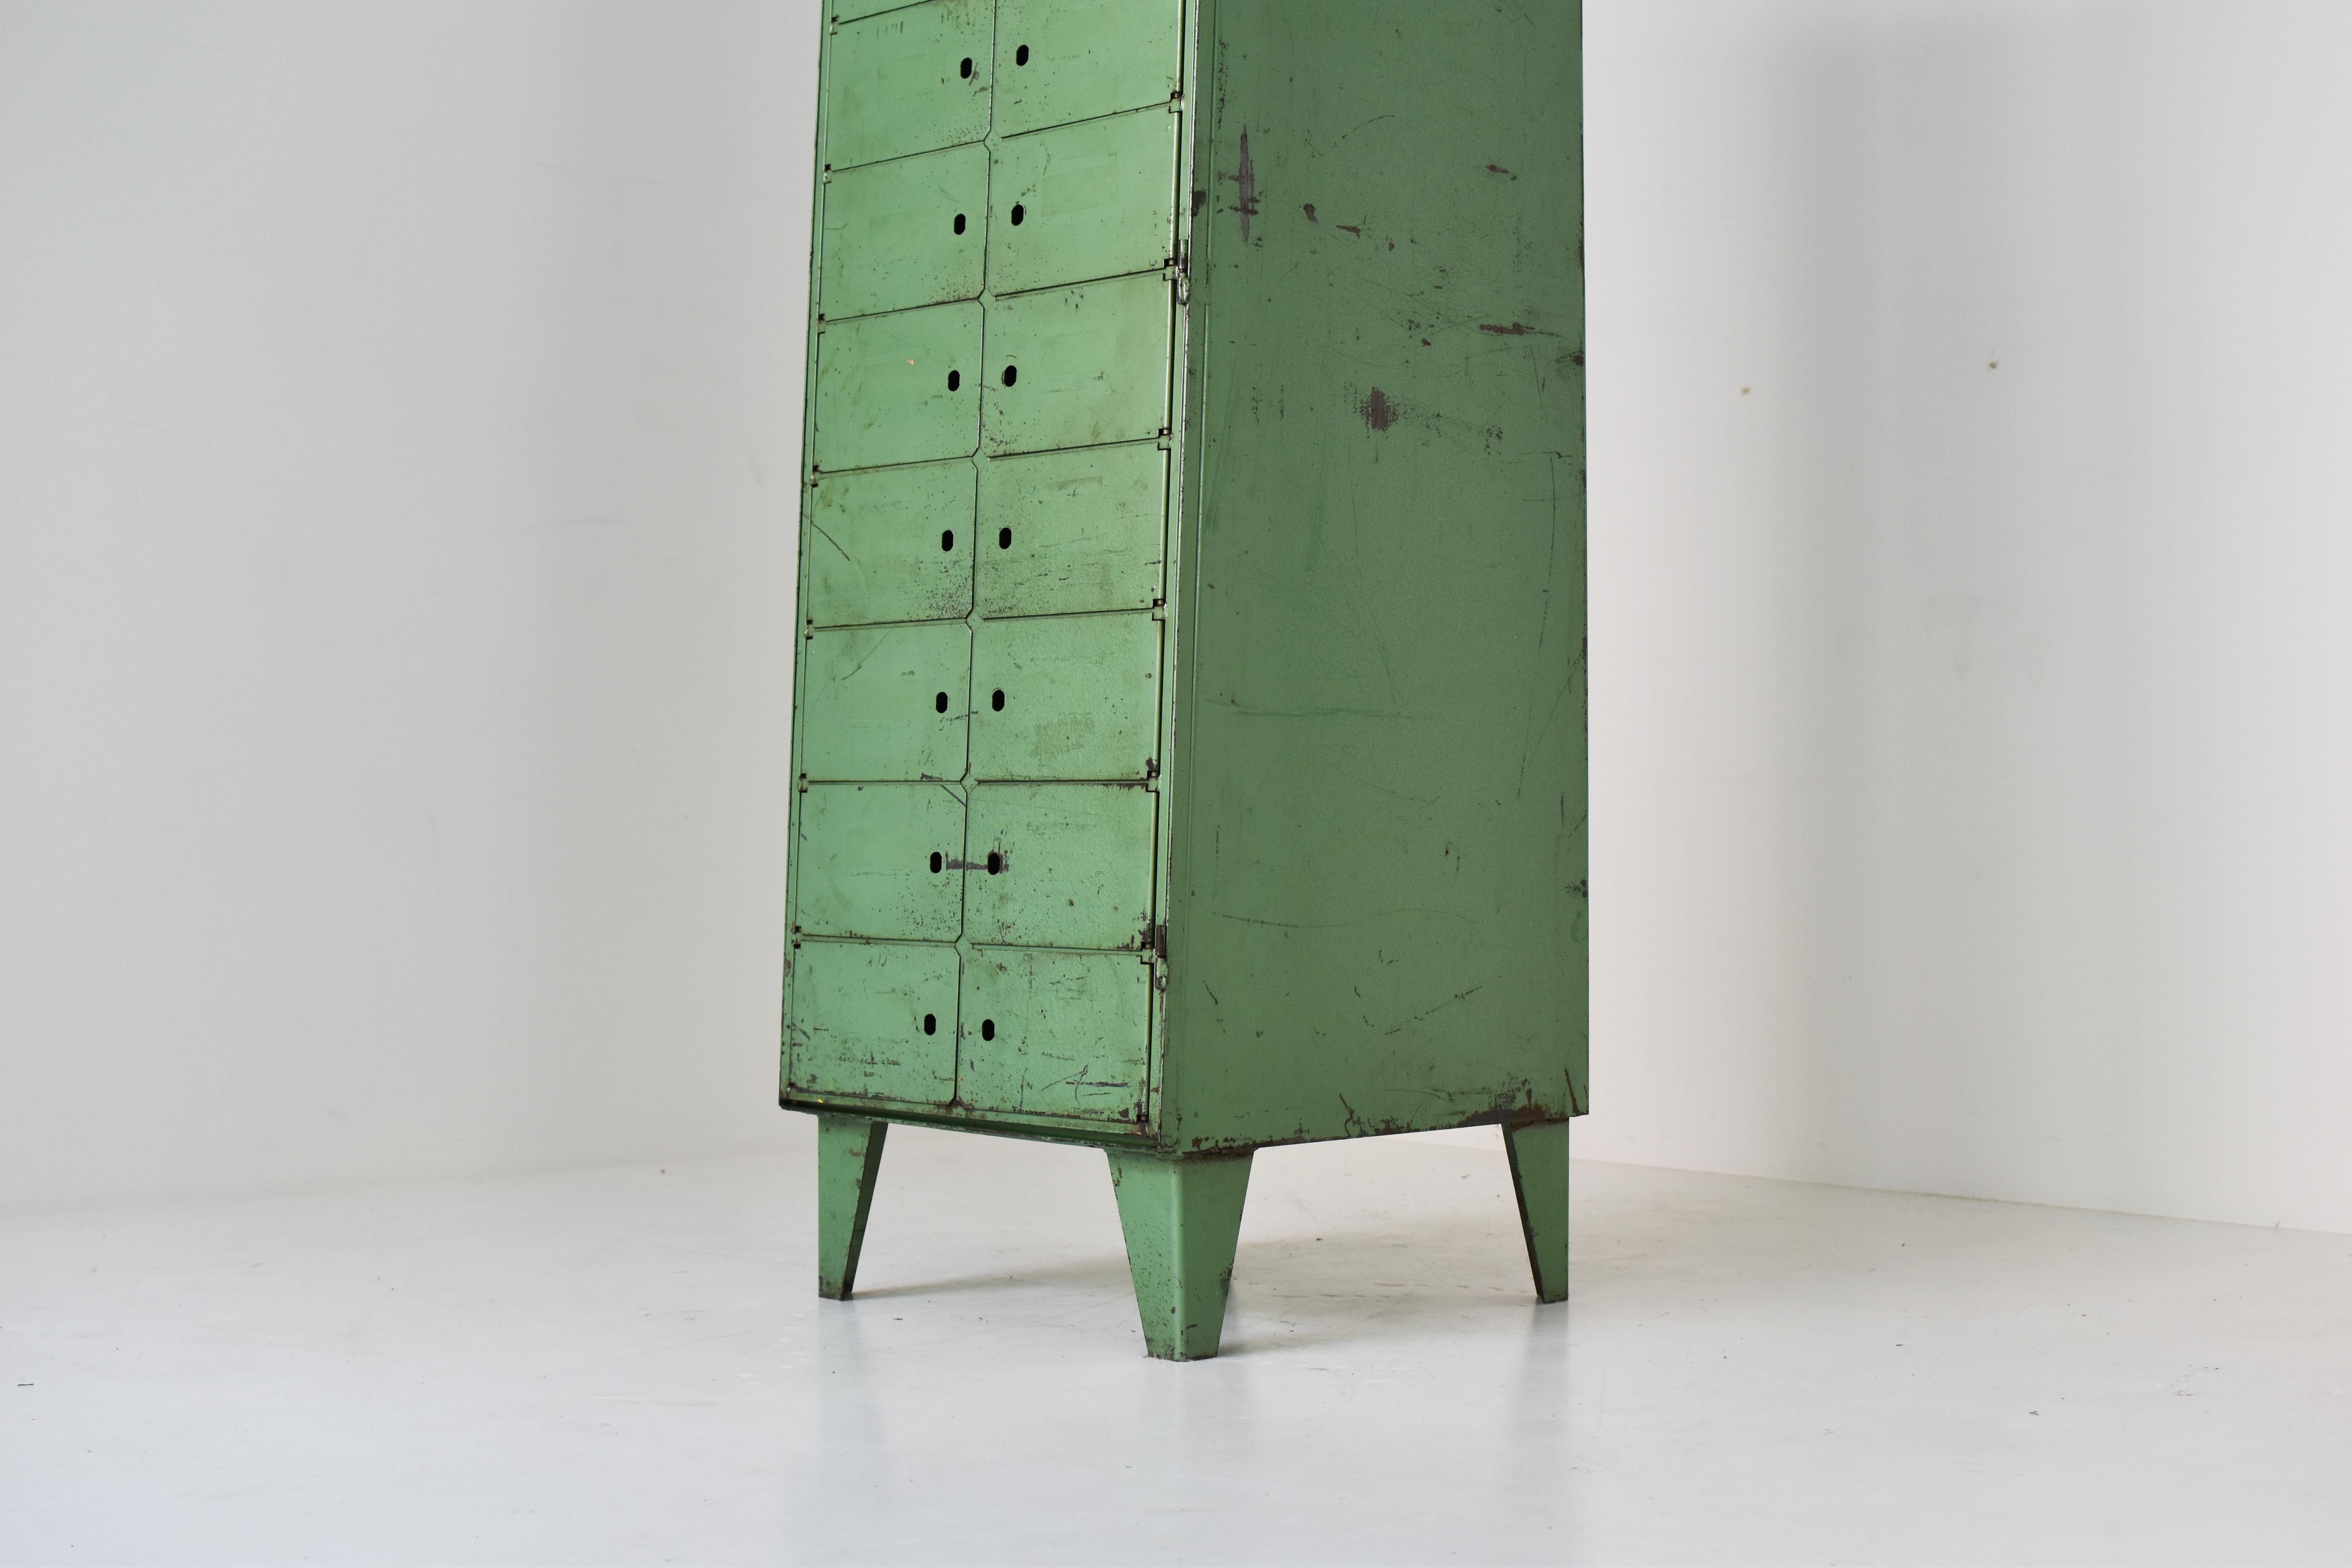 Steel Industrial Vitrine Cabinet Dating from the 1930s, Probably from the U.K